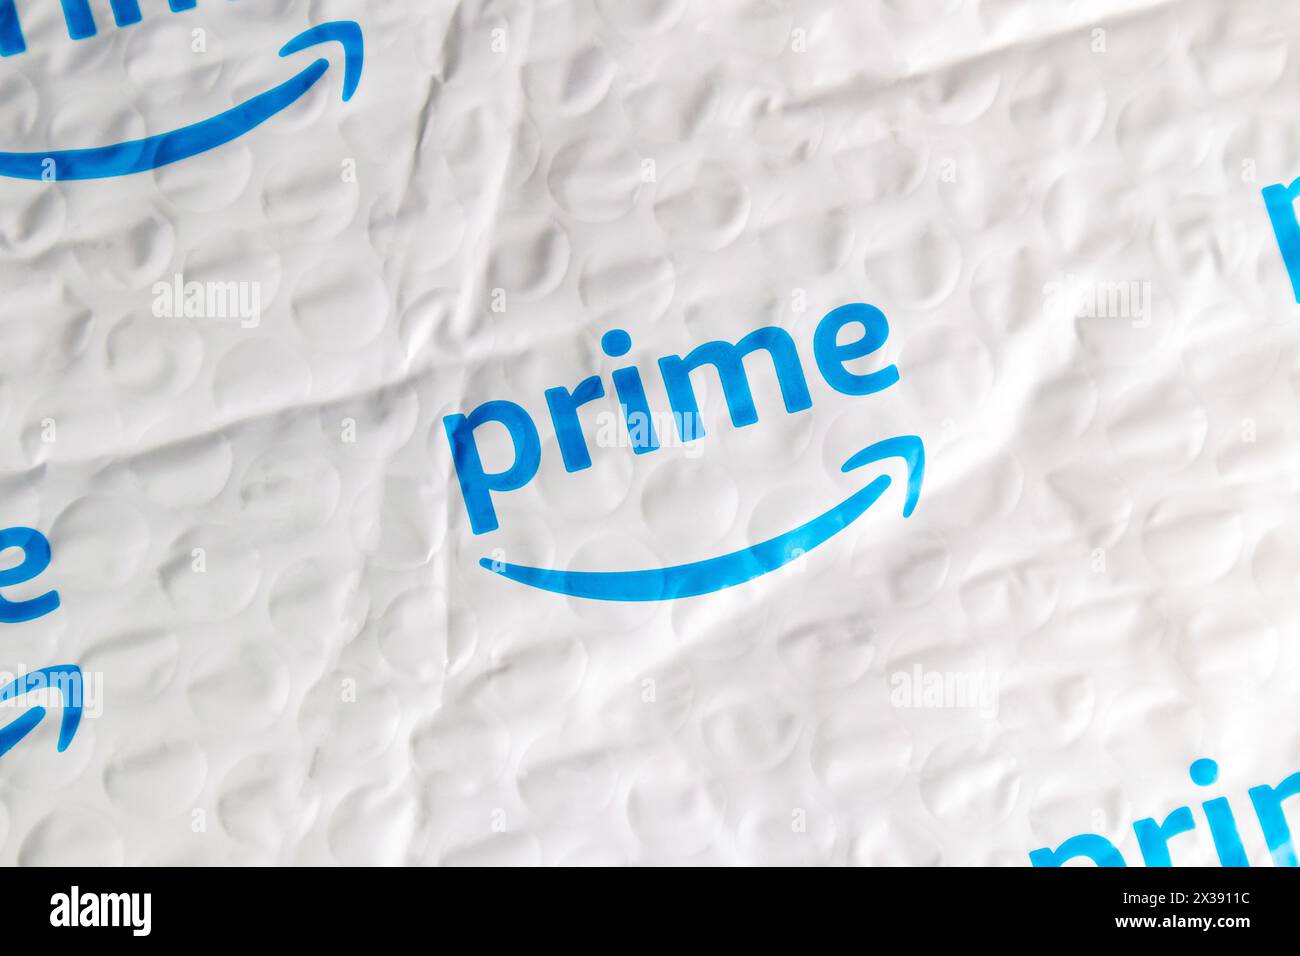 Amazon bubble package with the Amazon logo close up Stock Photo